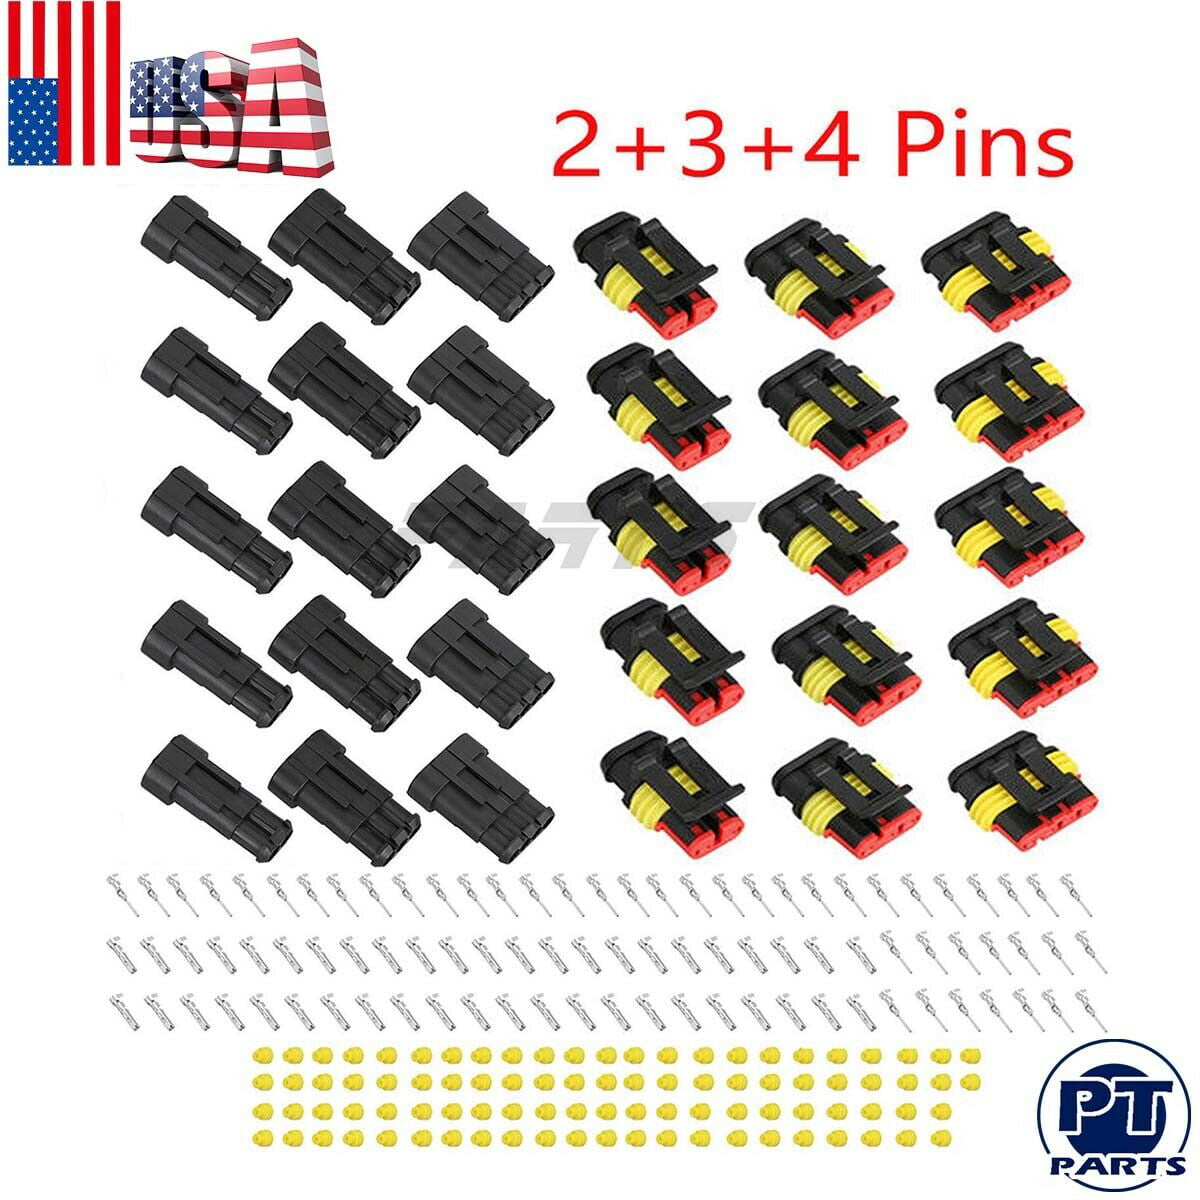 15 Kits 2 3 4 Pins Way Sealed Electrical Wire Connector Plug For Car Motorcycle 